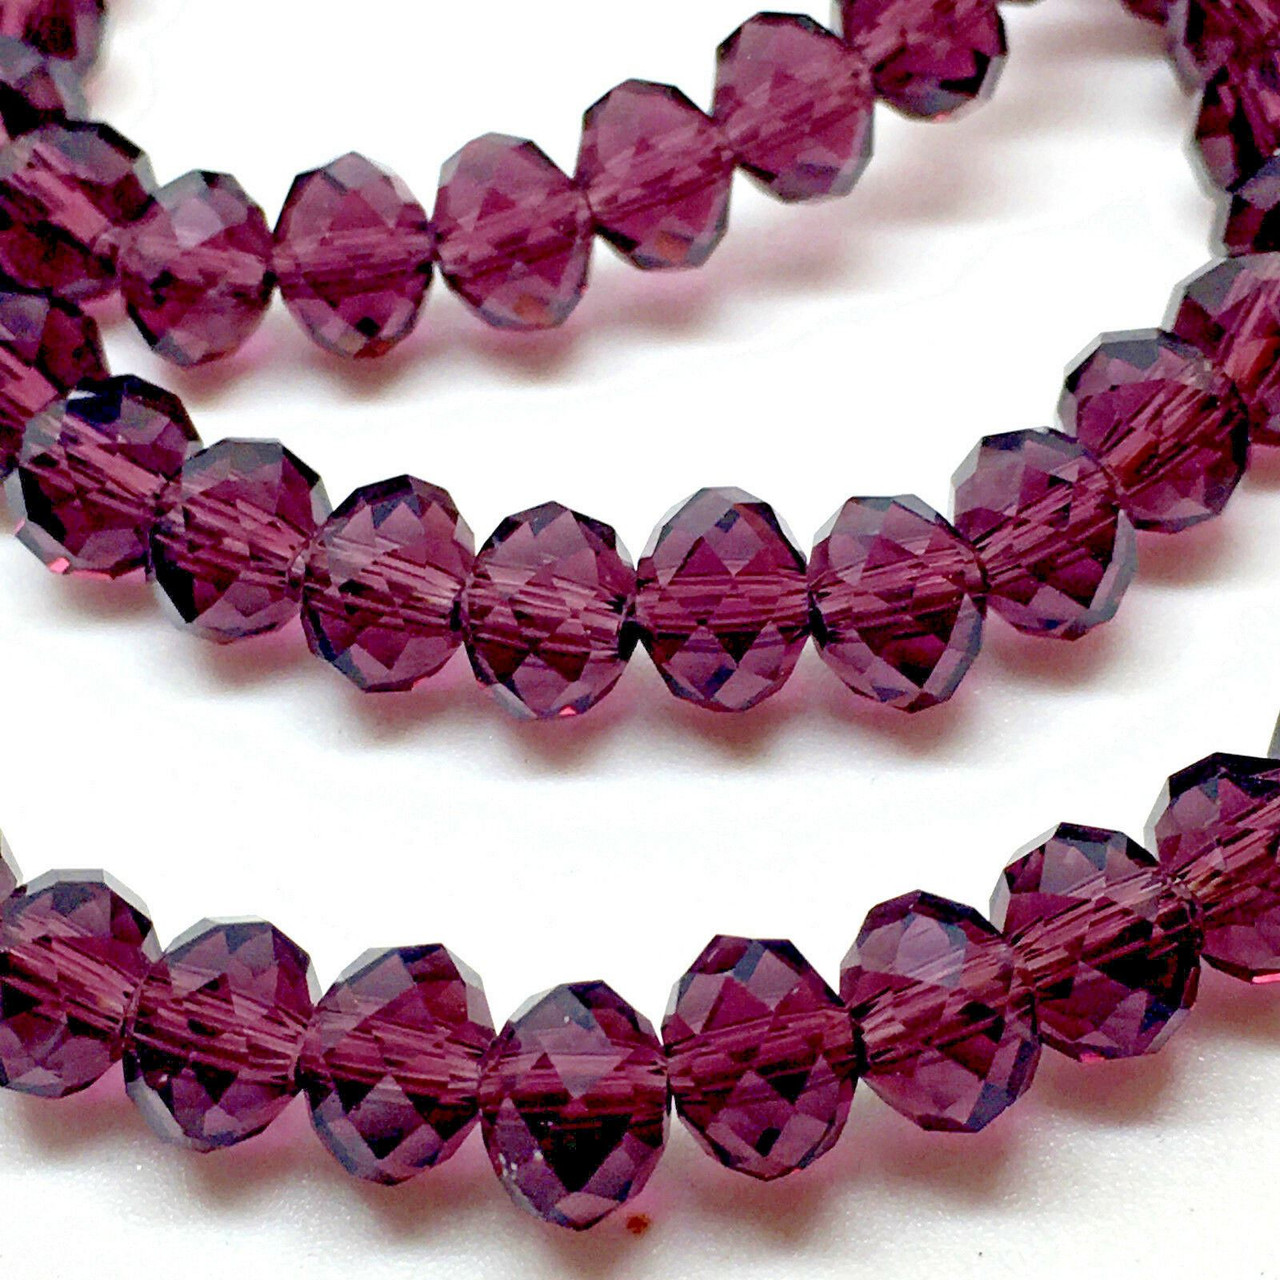 6x4mm Glass Rondelle beads - DARK PLUM - approx 18 inch strand (approx 100 beads)